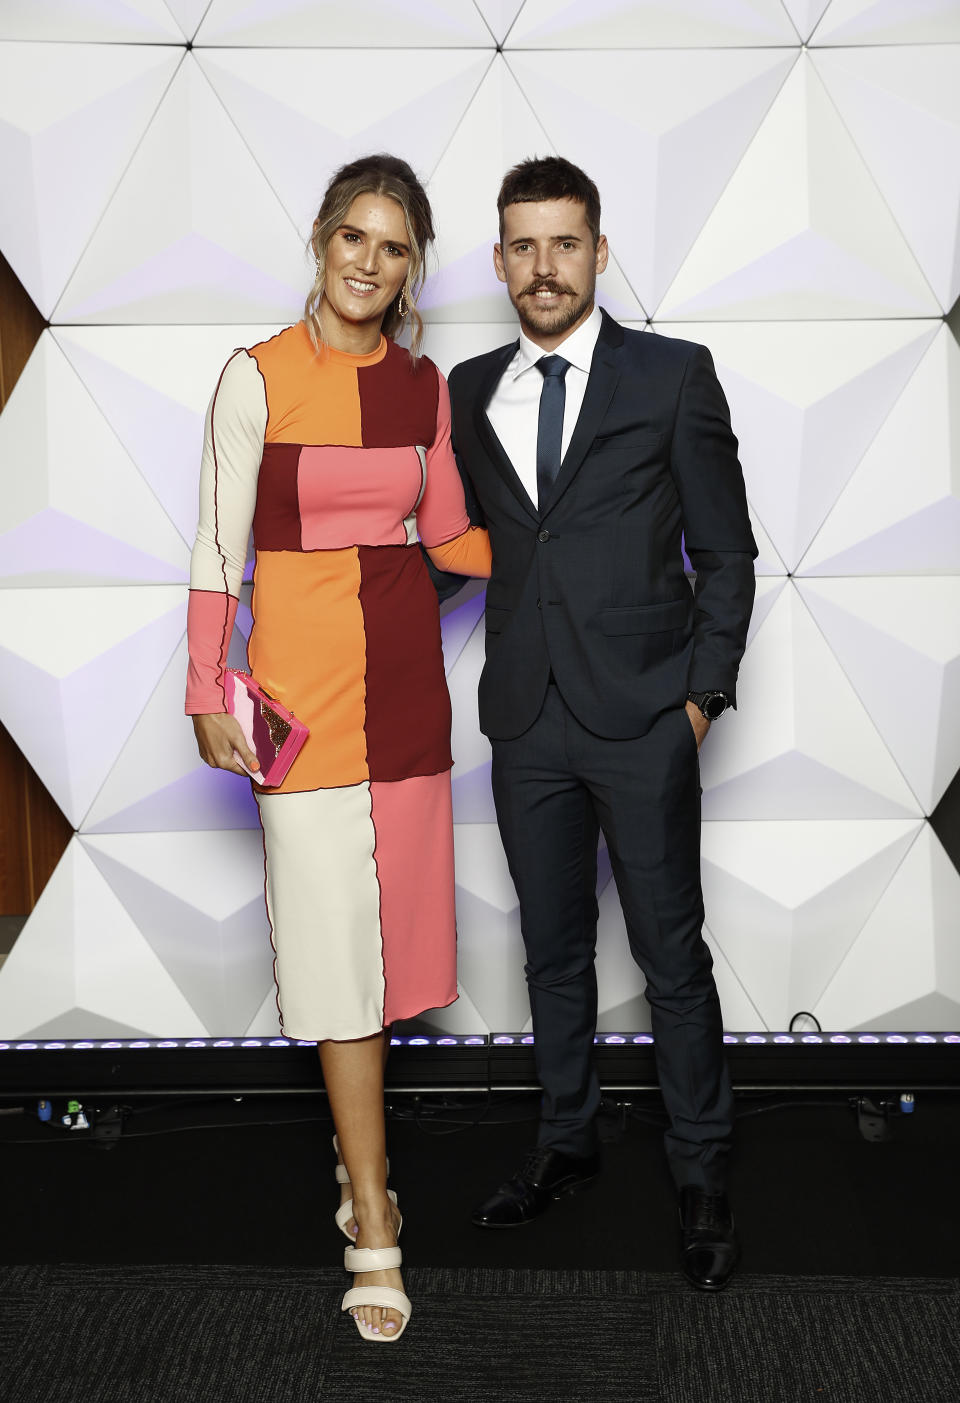 Jake Lloyd of the Swans and partner Zoe Heard attend the Sydney Brownlow Medal Function at the Sydney Cricket Ground during the 2020 AFL Brownlow Medal count on October 18, 2020 in Sydney, Australia.